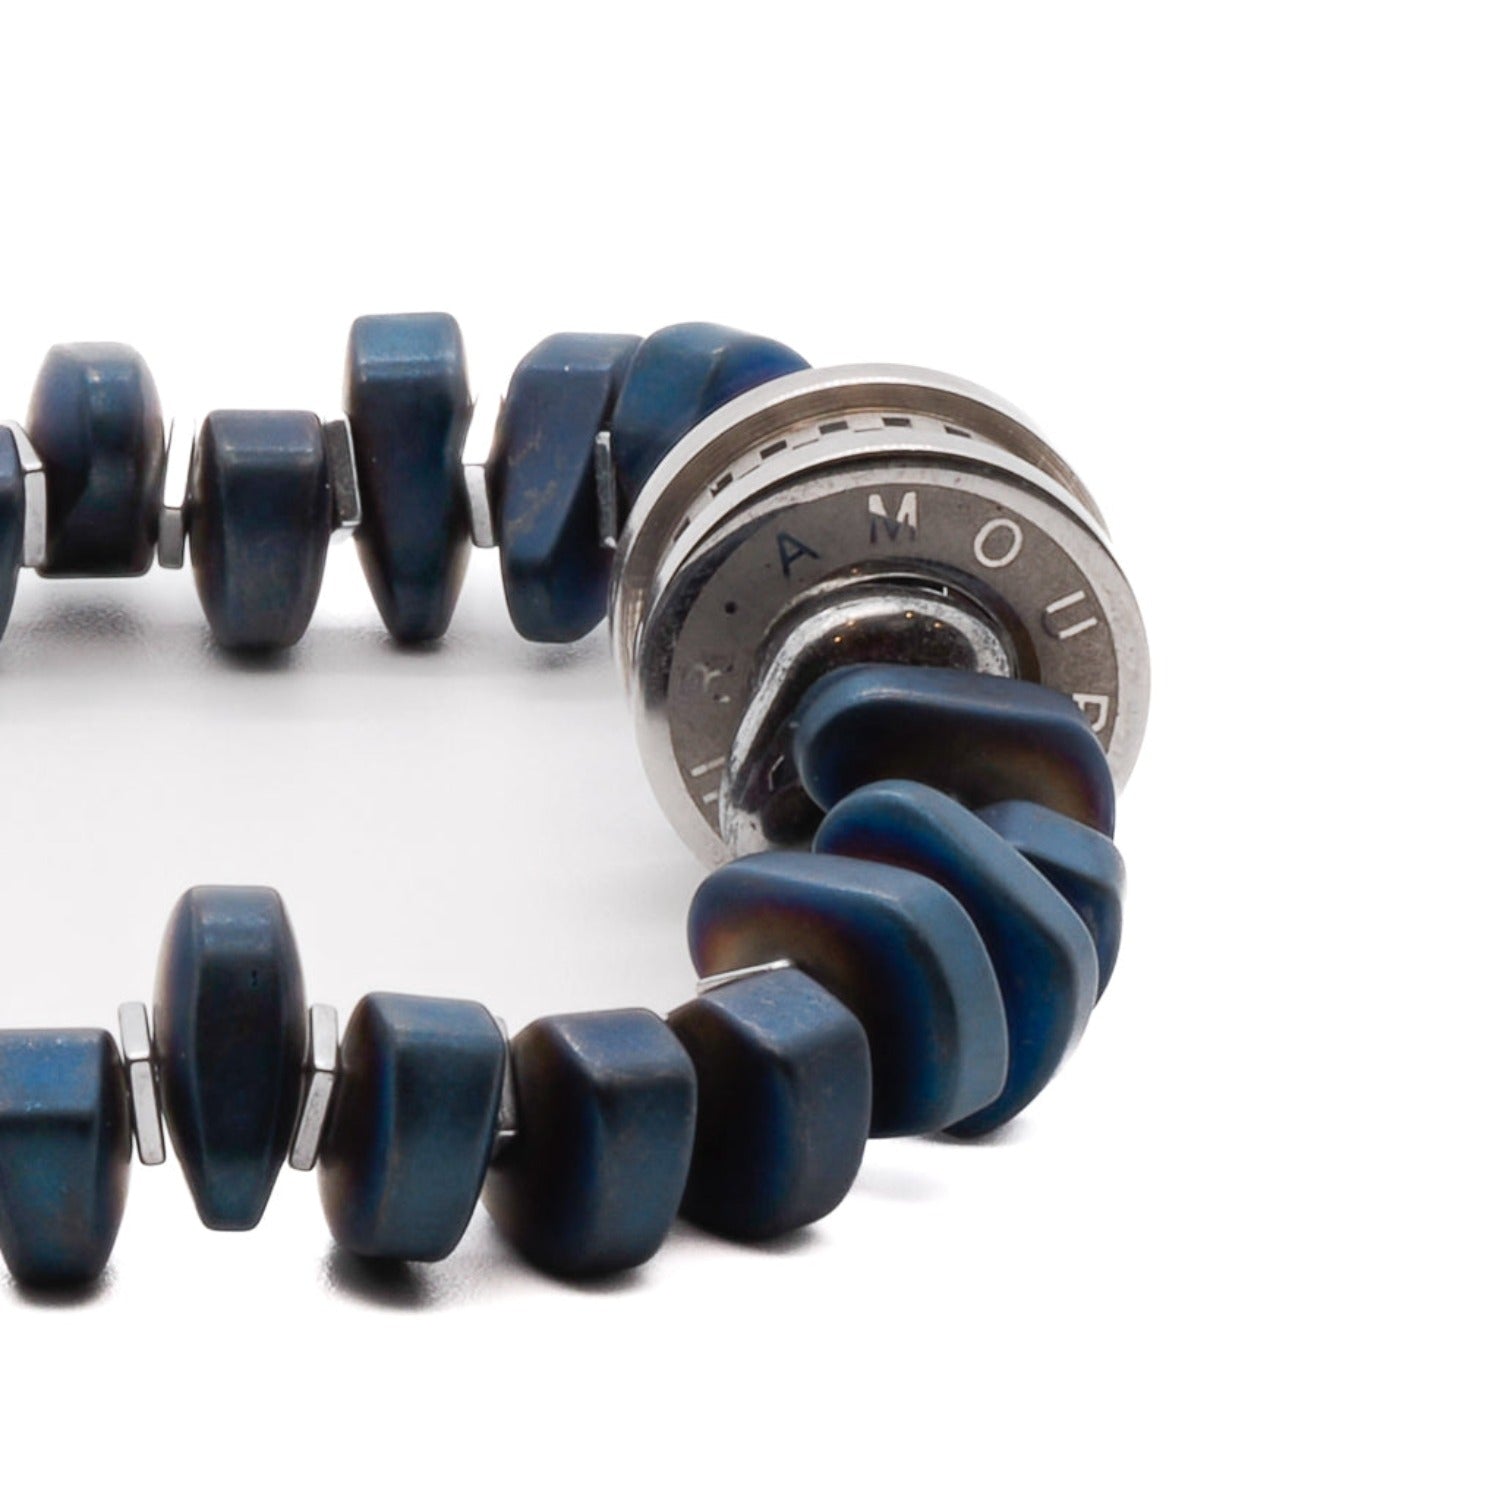 A close-up of the blue hematite nugget beads on the Blue Amour Men Bracelet